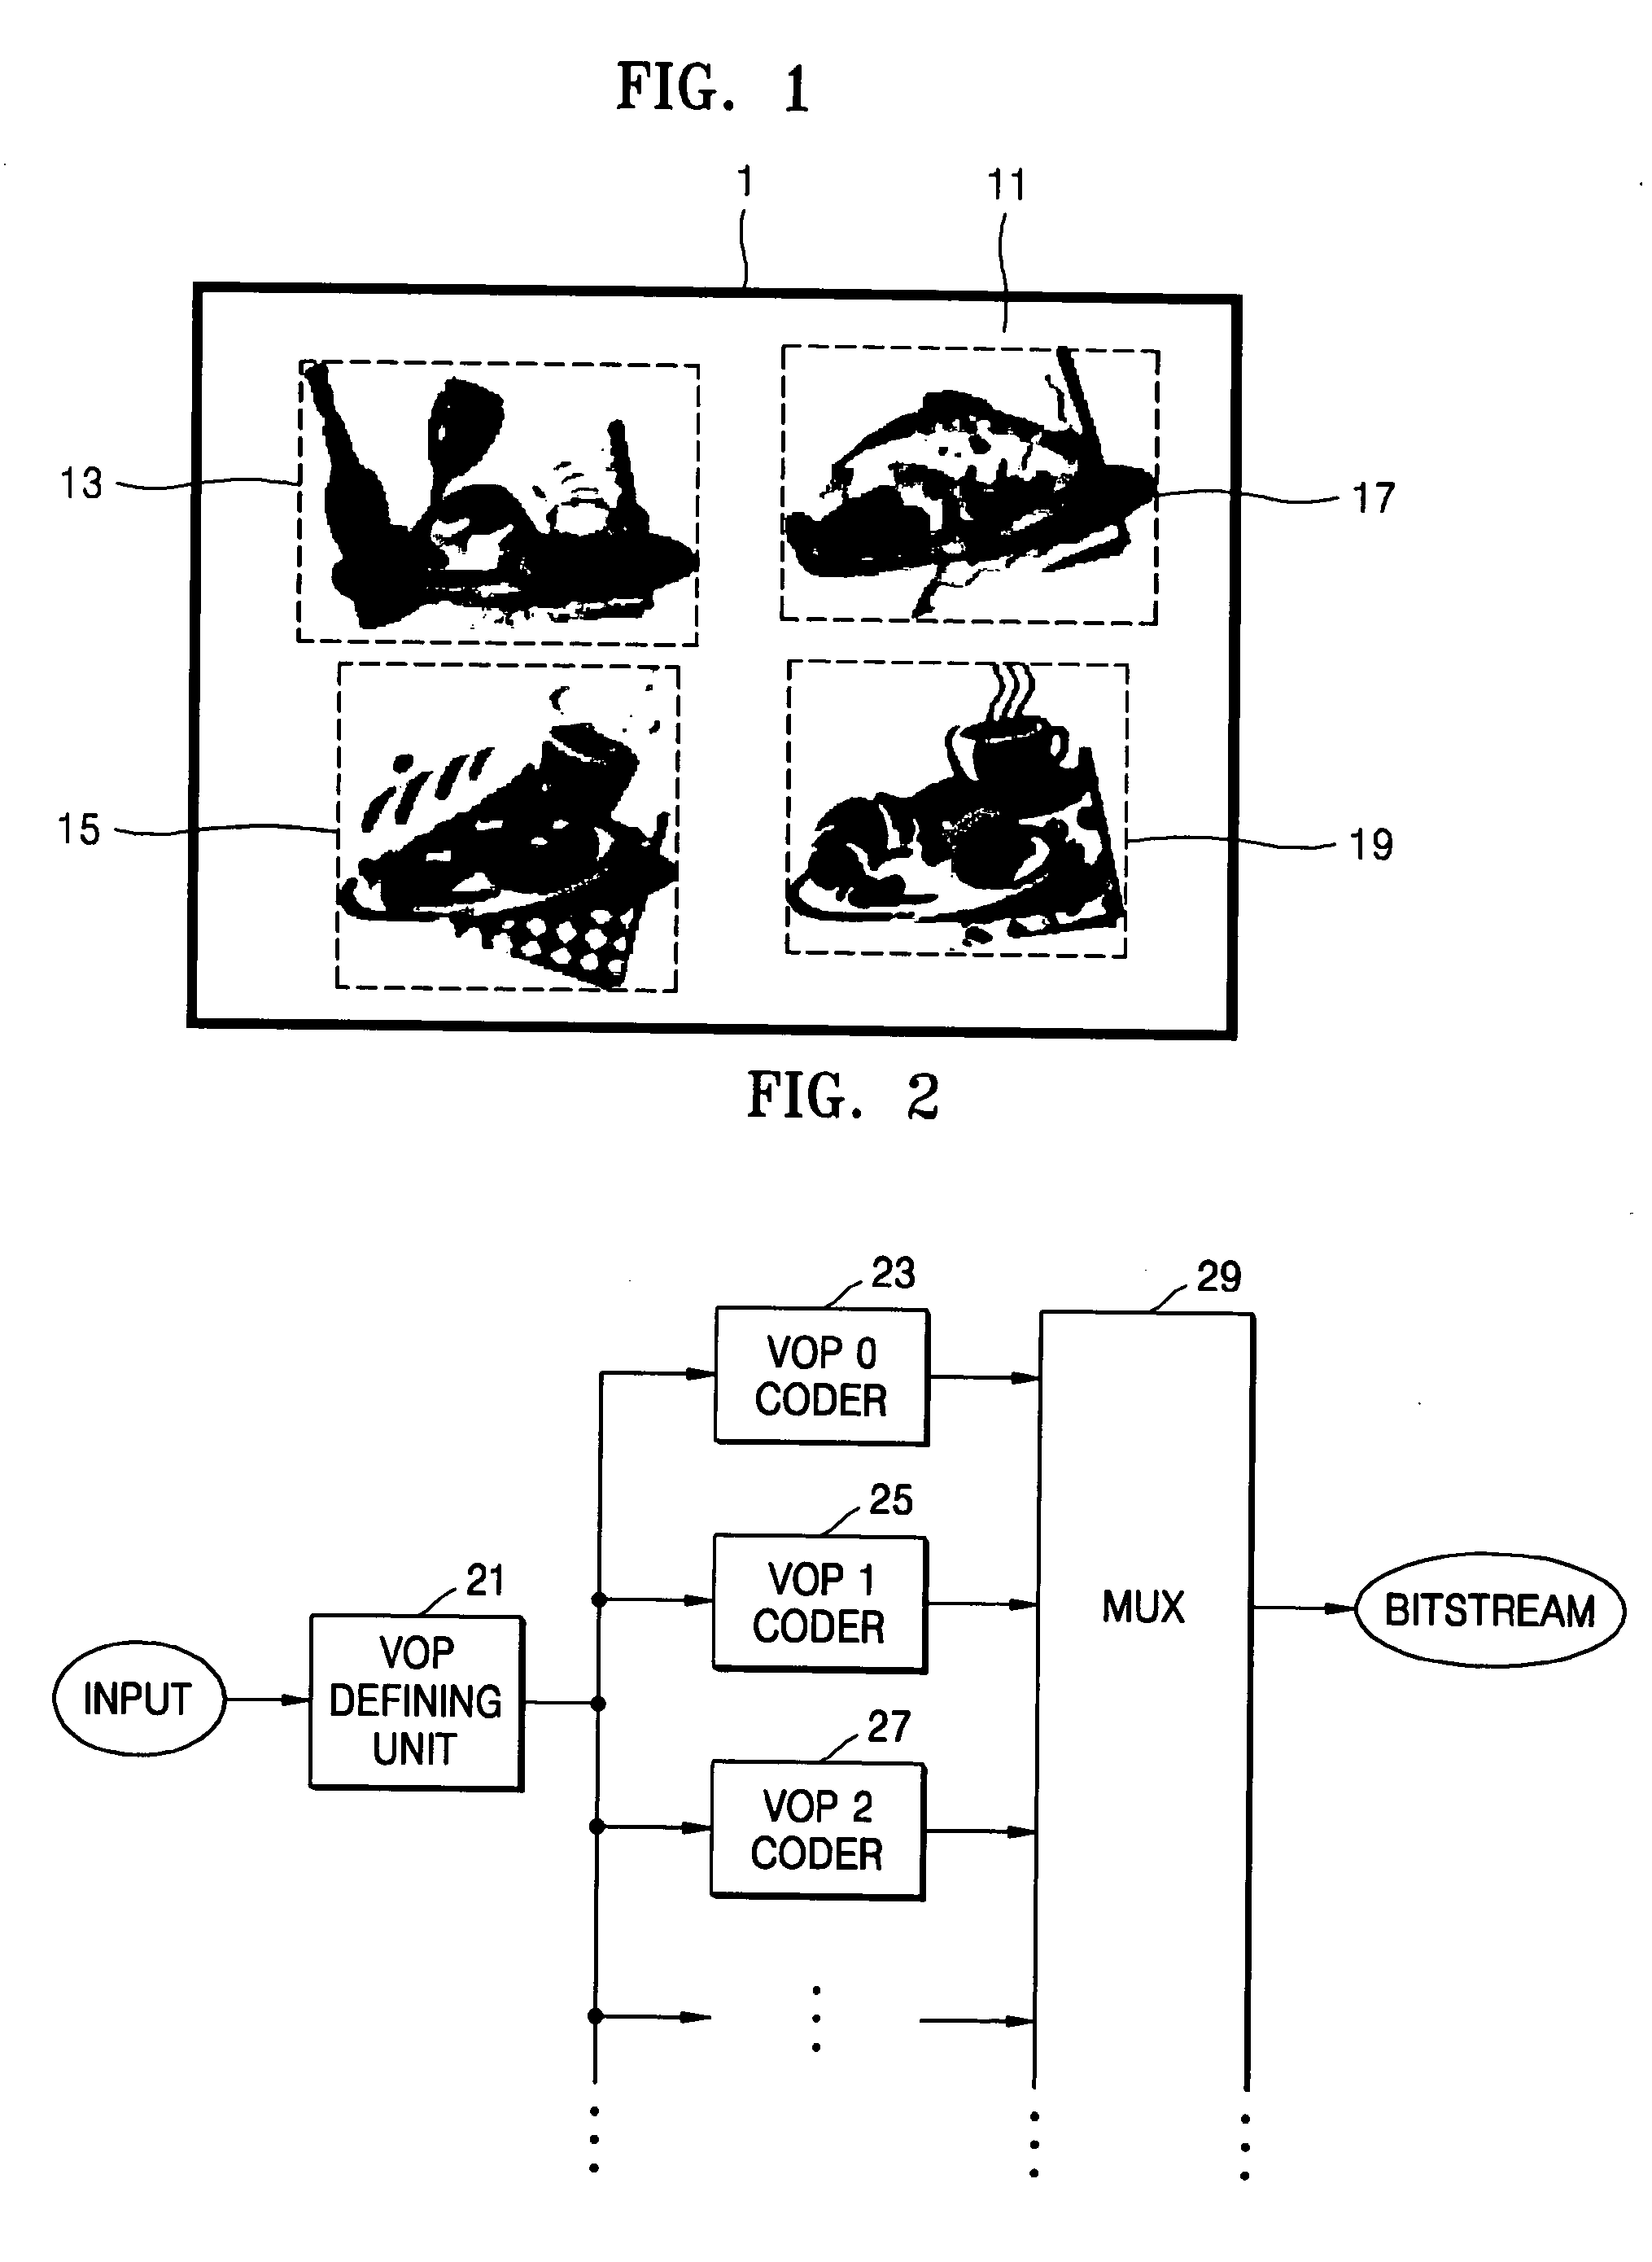 Apparatus and method for processing video data using gaze detection